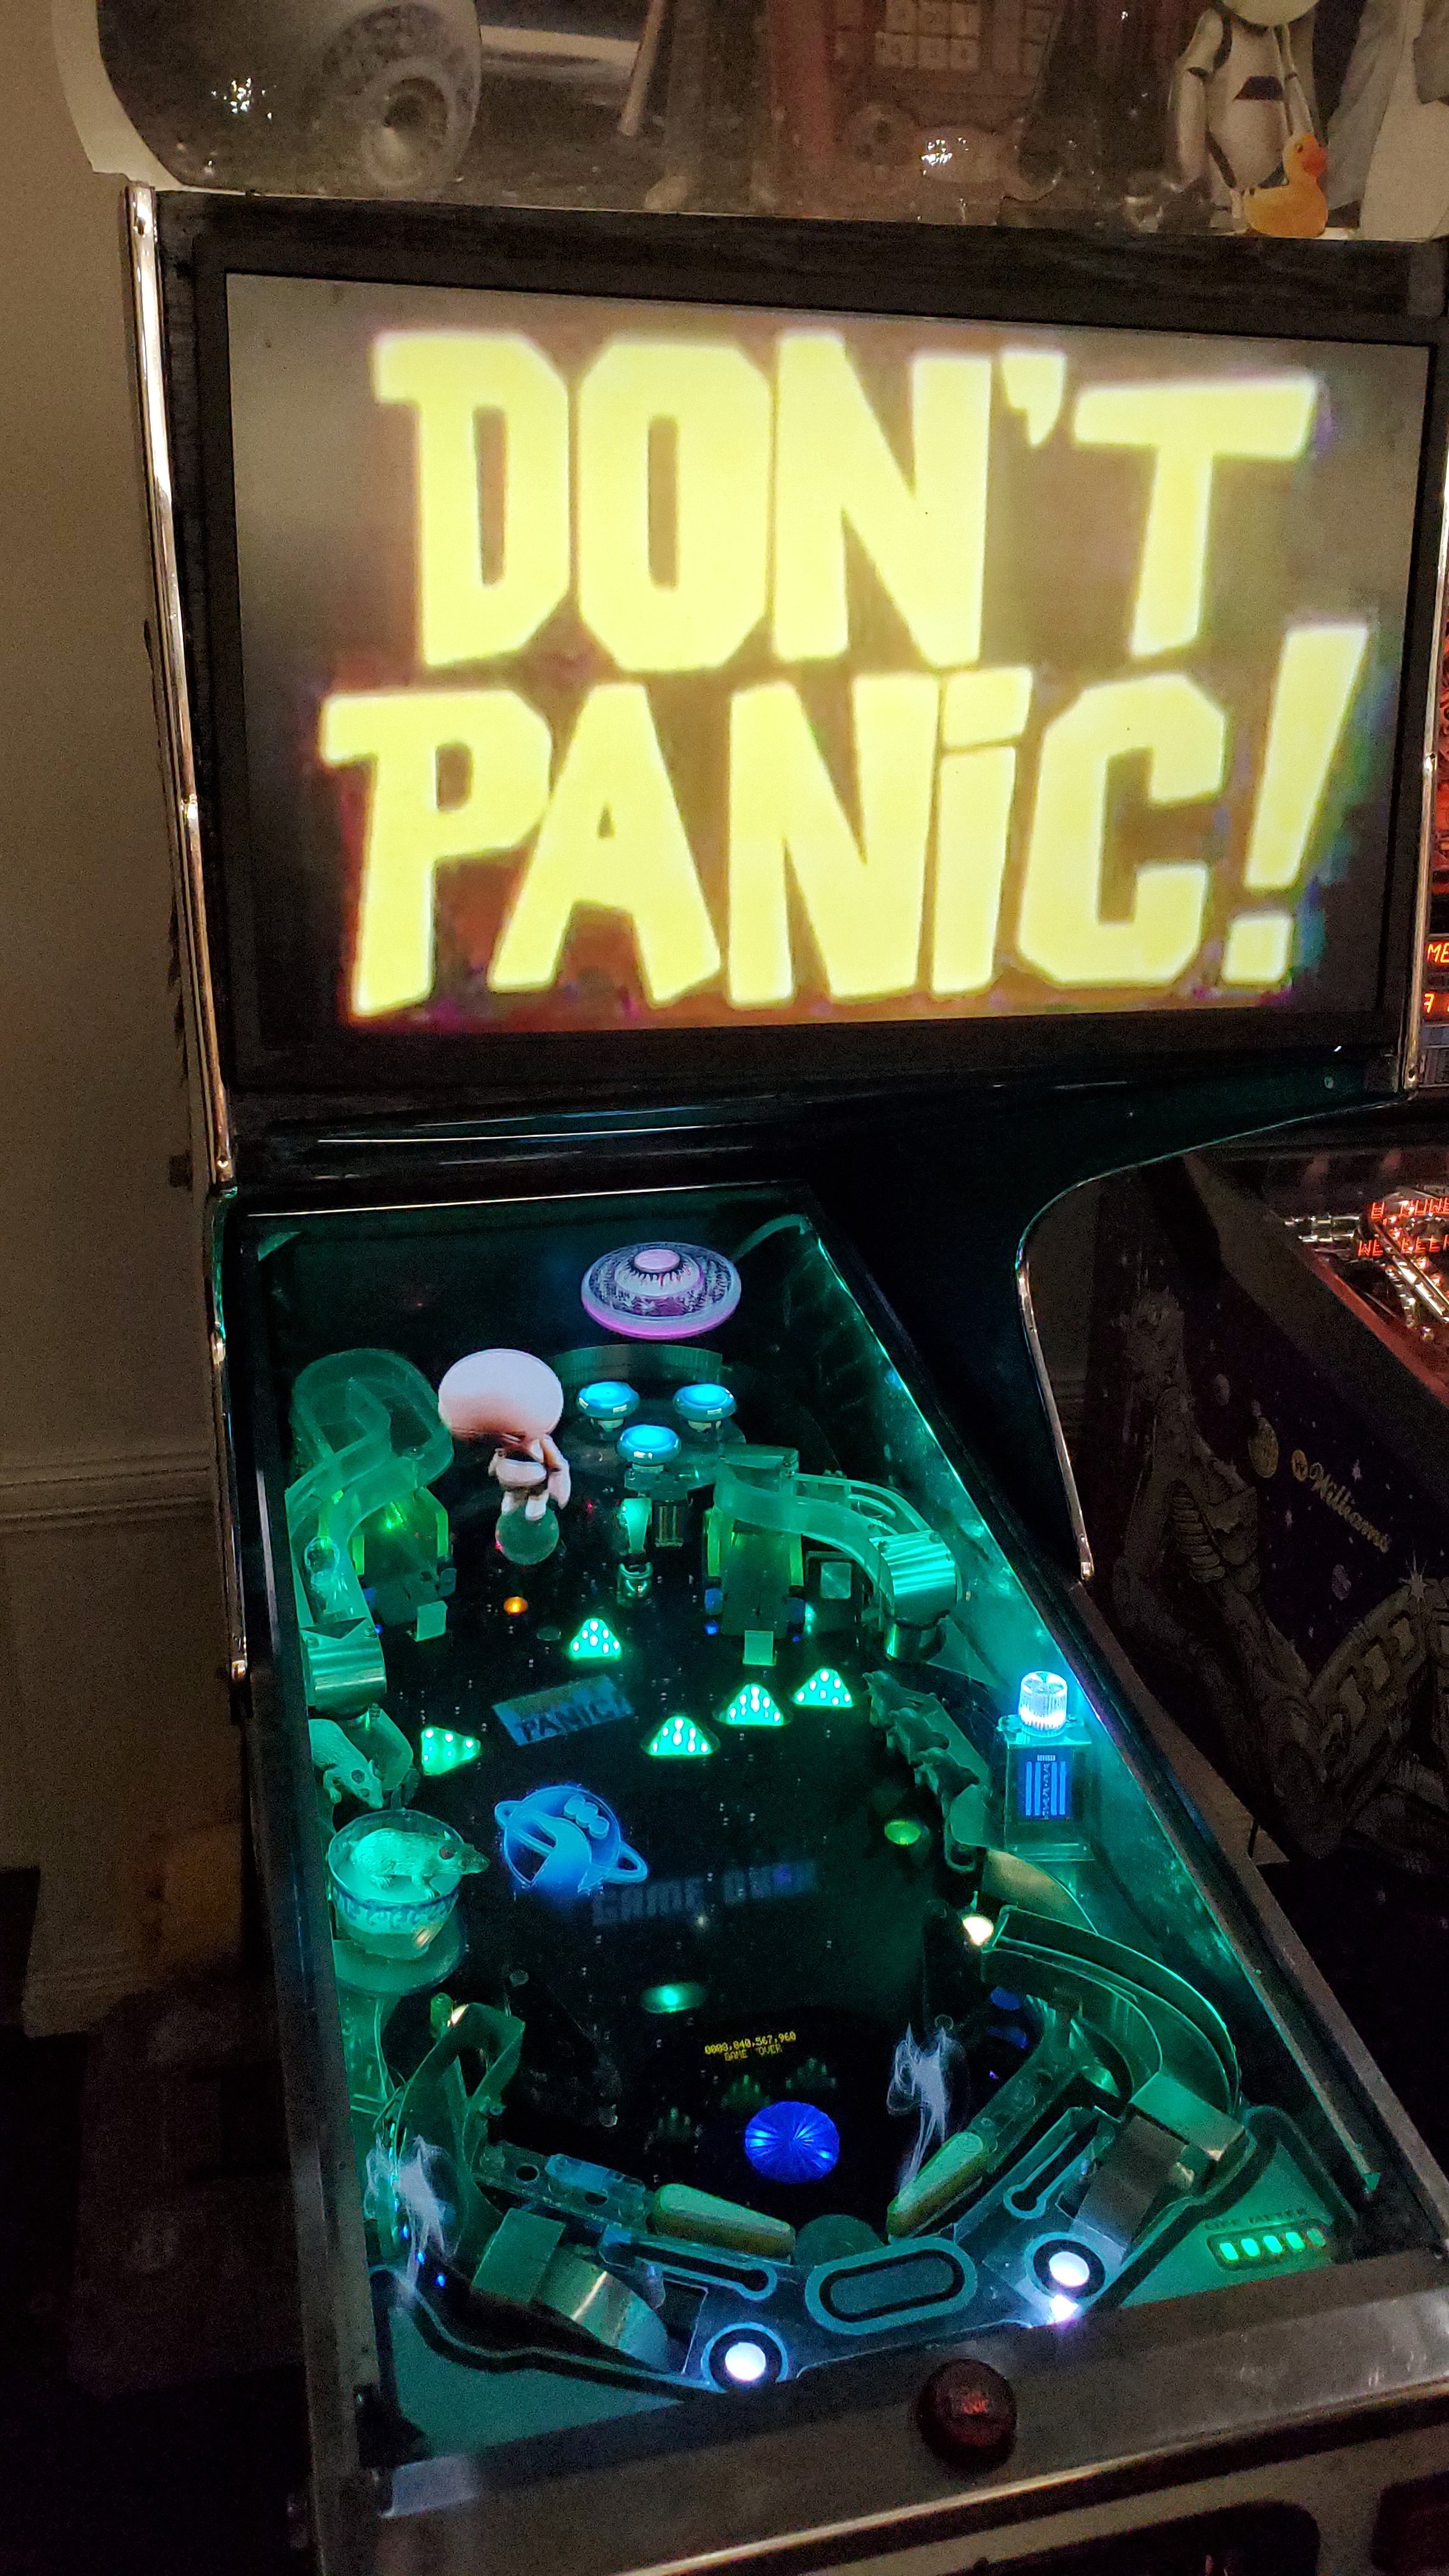 The Hitchhikers Guide to the Galaxy Pinball gameplay